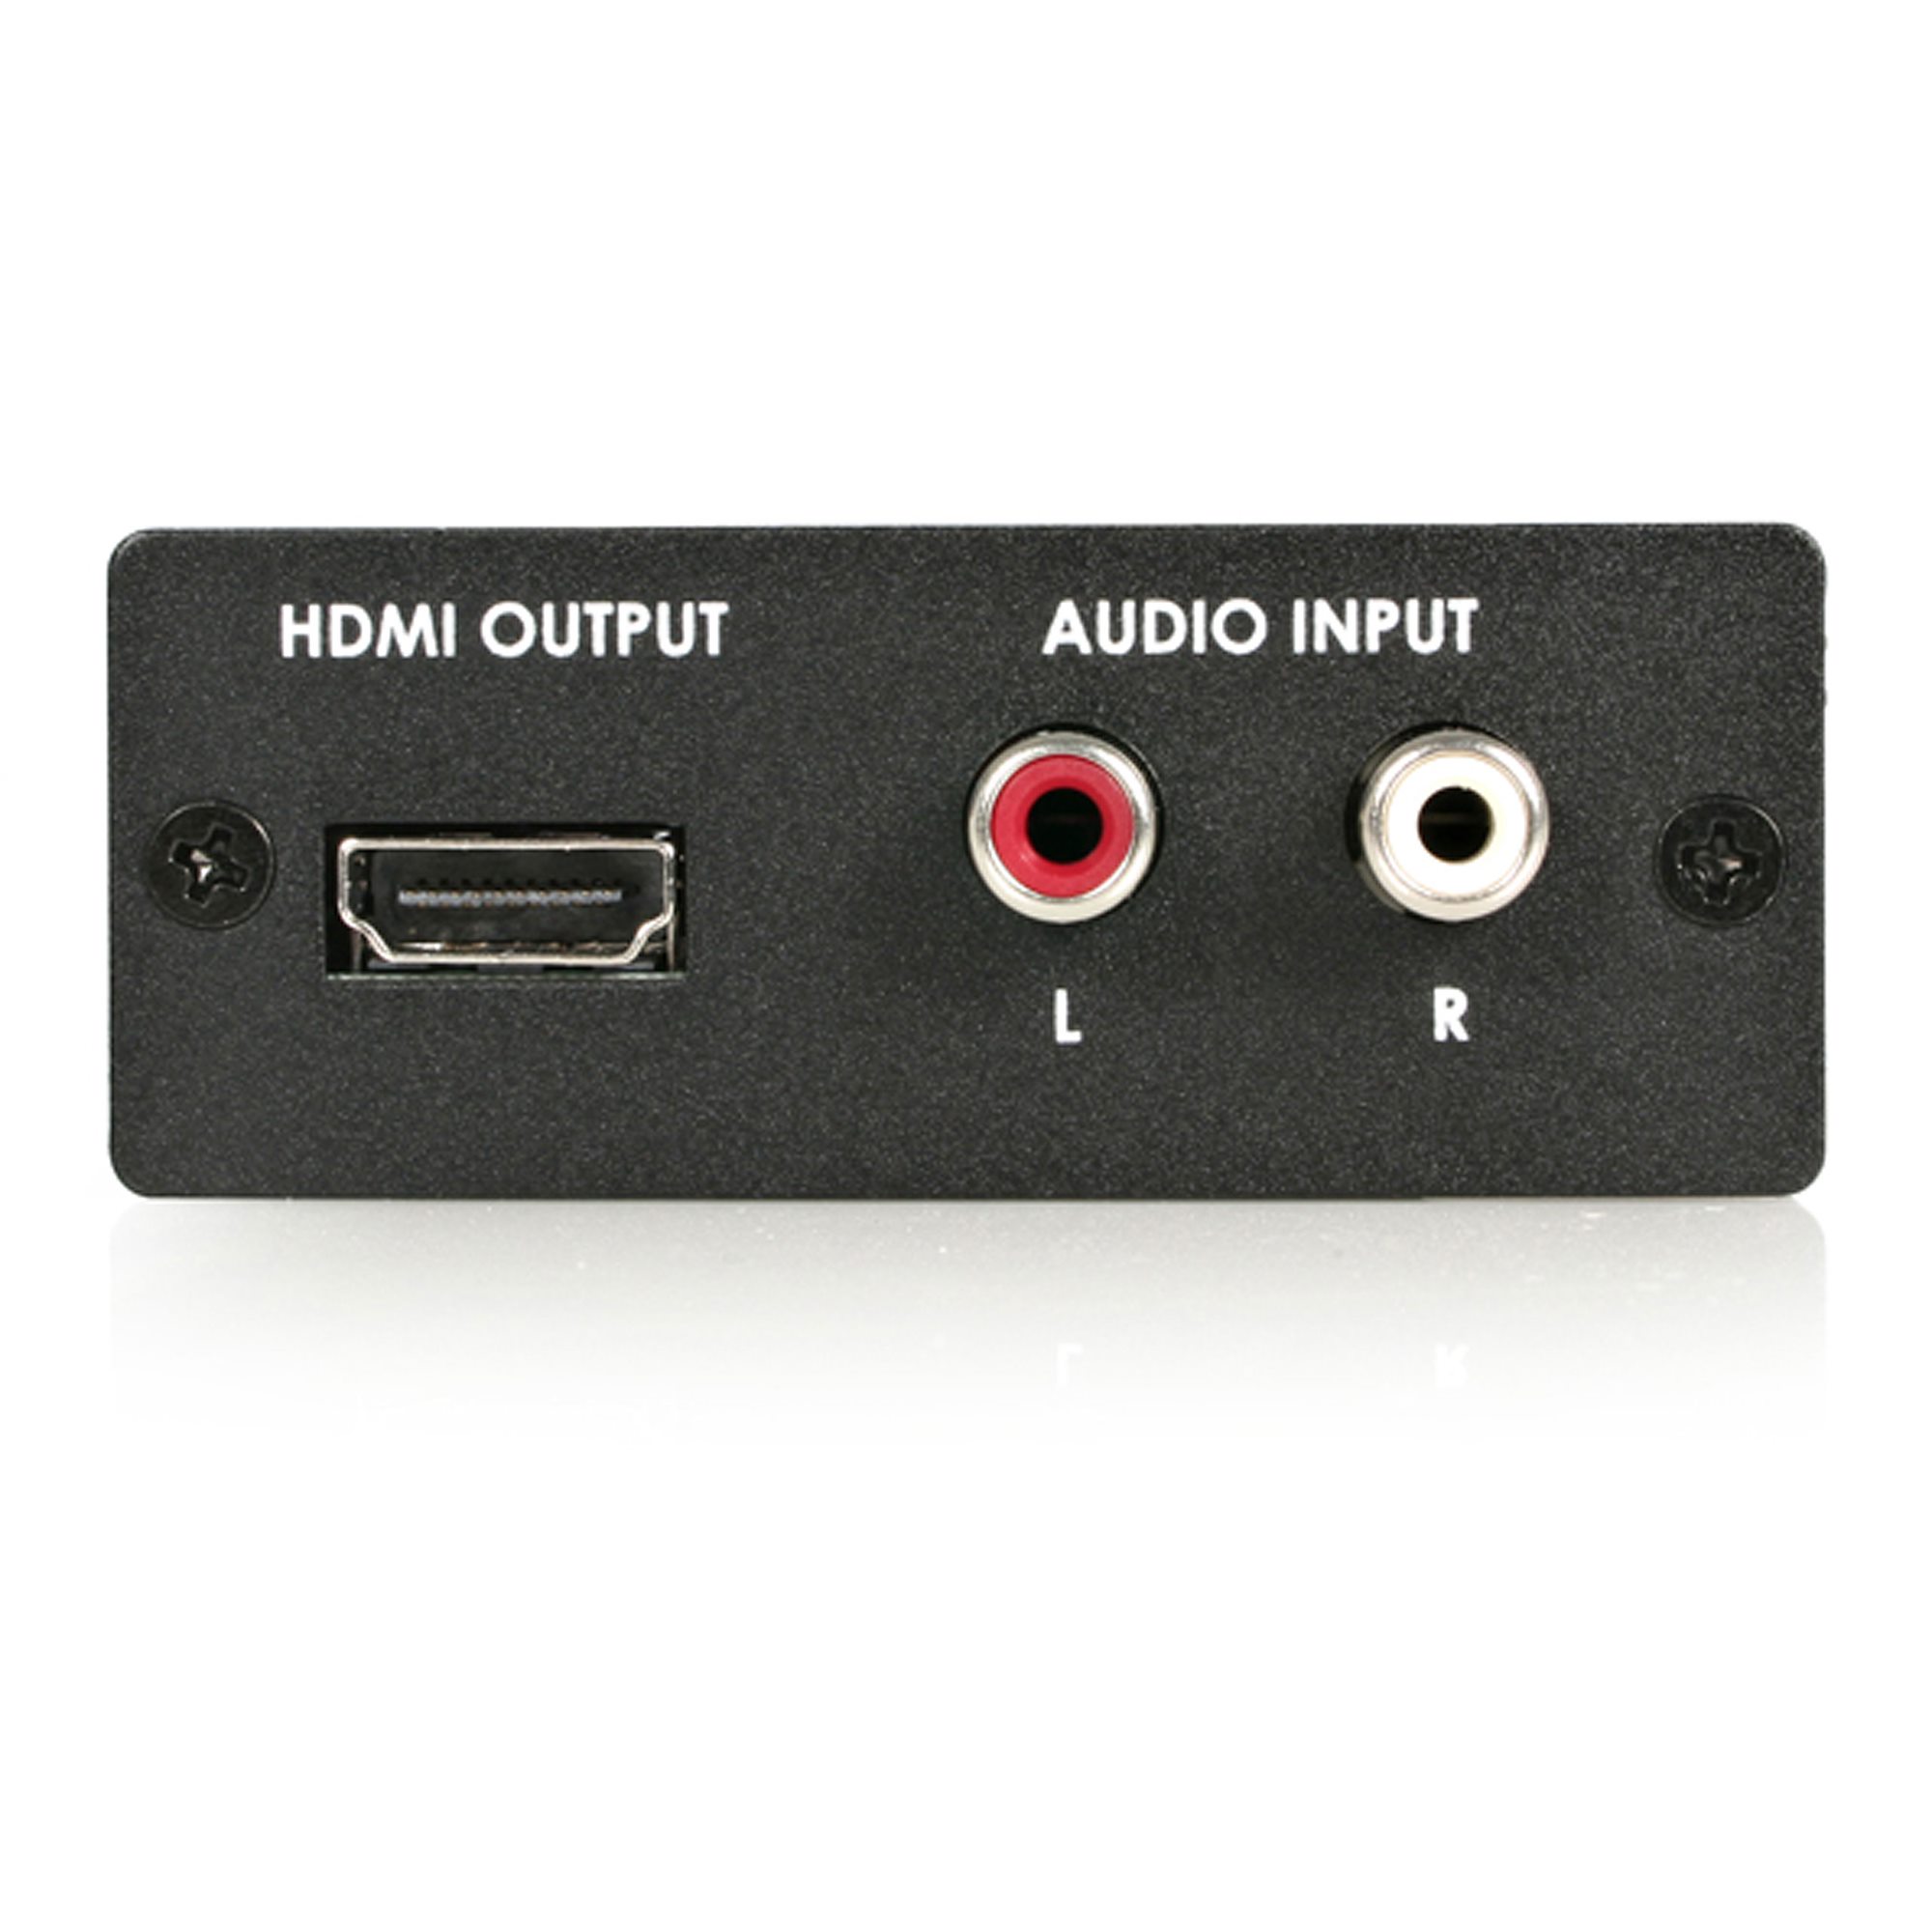 Component / VGA Video and Audio to HDMI Converter - PC to HDMI - 1920x1200